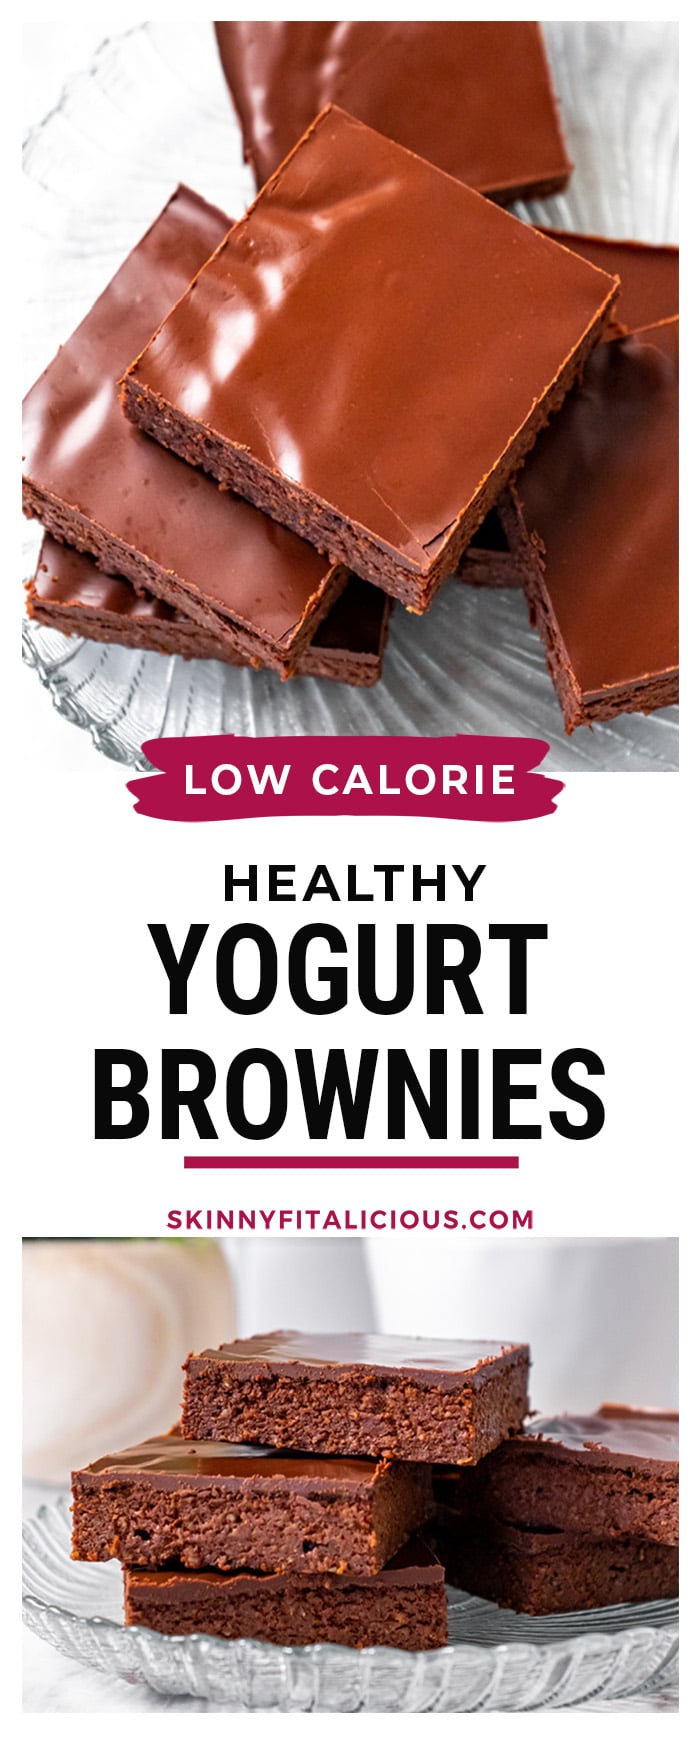 Healthy Greek Yogurt Brownies made with oat flour are lighter, packed with protein and topped with a chocolate ganache.